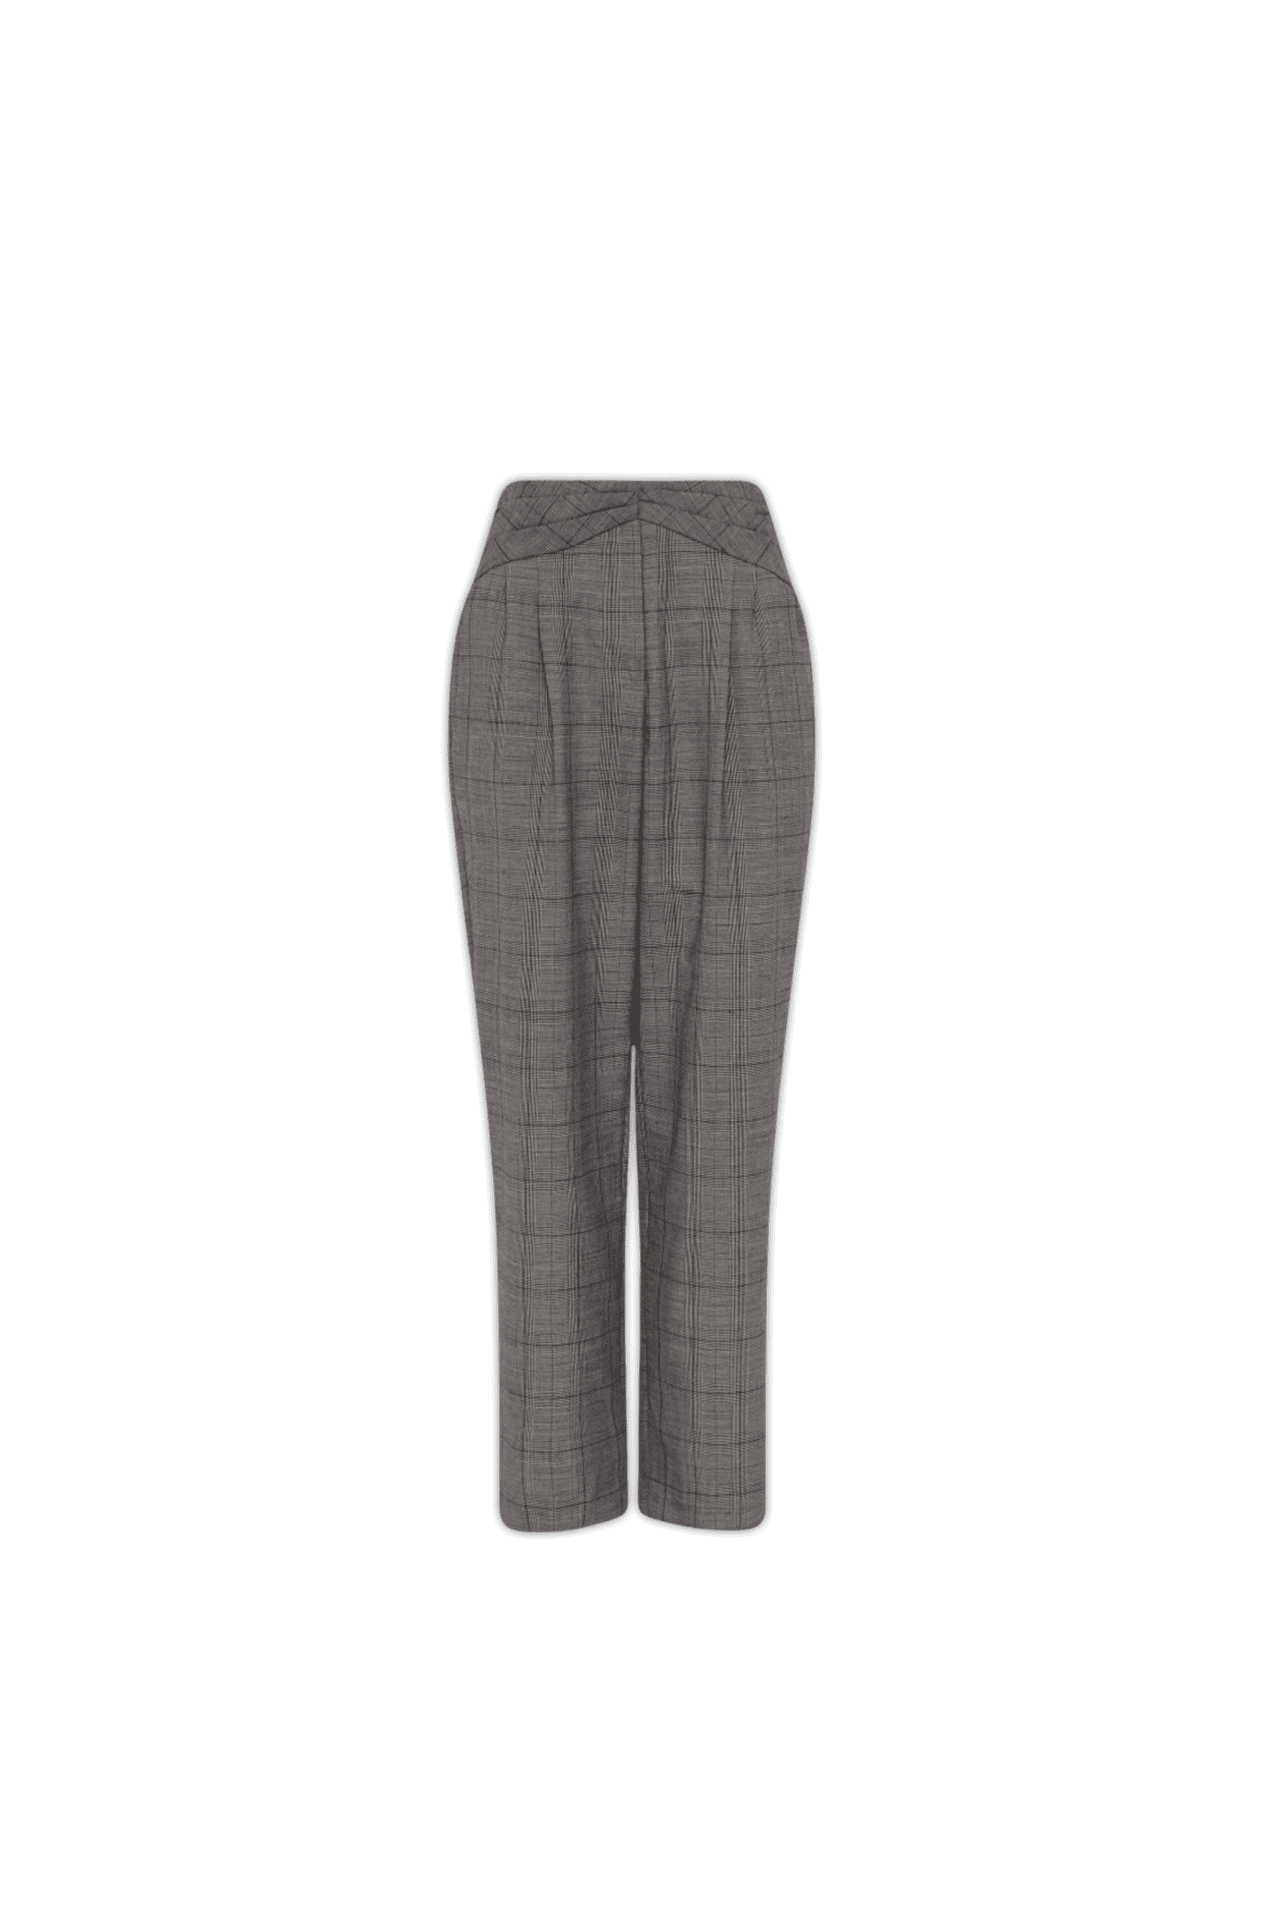 XS, Grey, Designed to sit at the waist, these endlessly soft wool pants offer a tapered leg style that descend to ankle length featuring a classic fly front closure, pleats at the front of the waist, angled pockets at the hip, and welt pockets at the back.